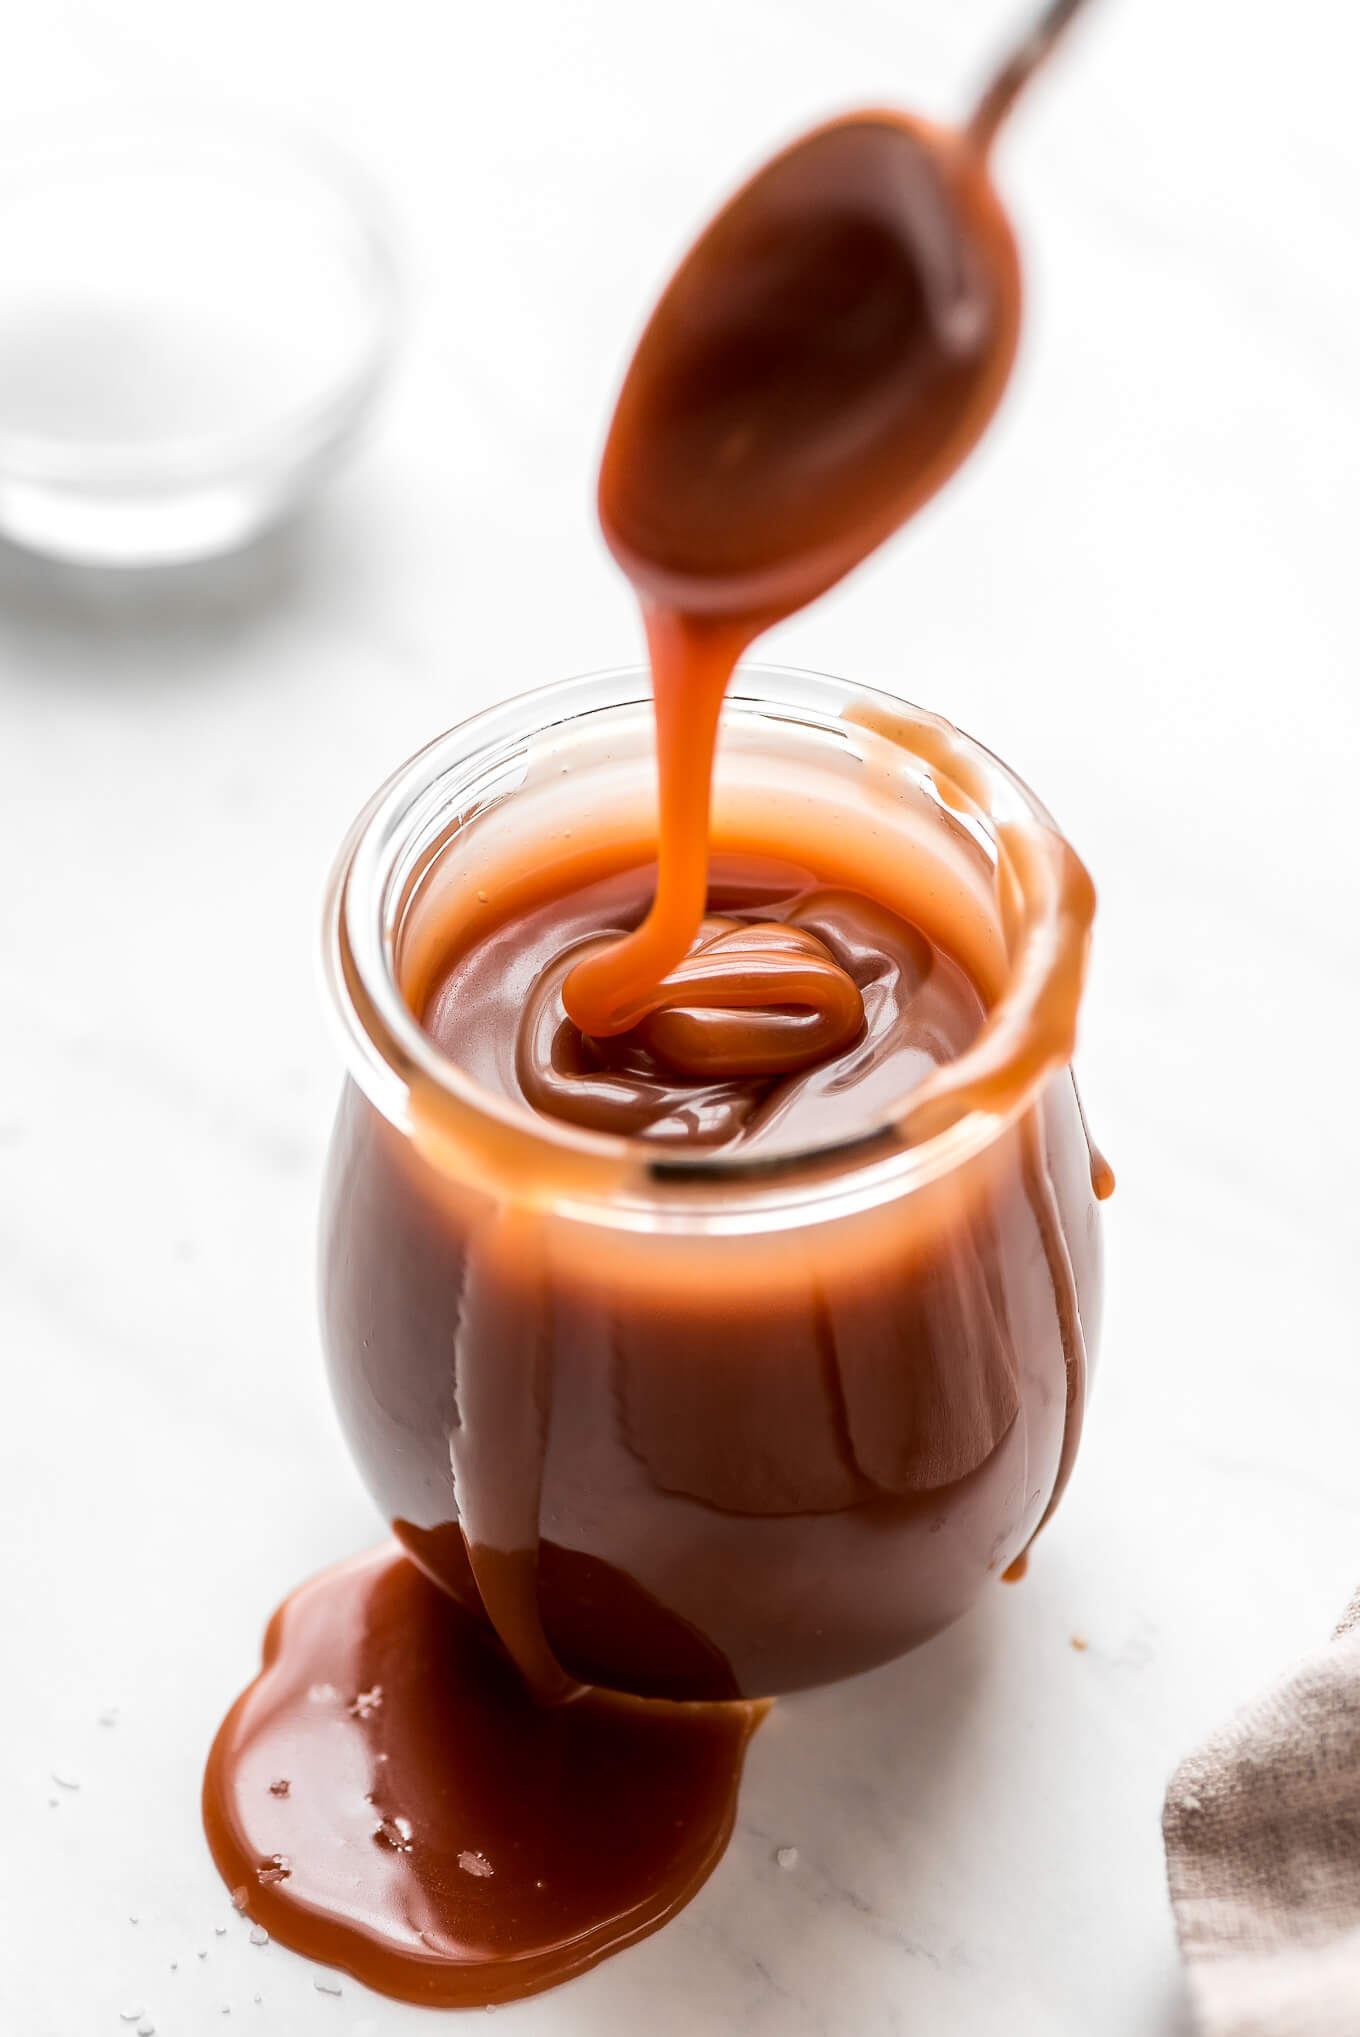 Caramel drizzling down from a spoon into a jar of salted caramel sauce.